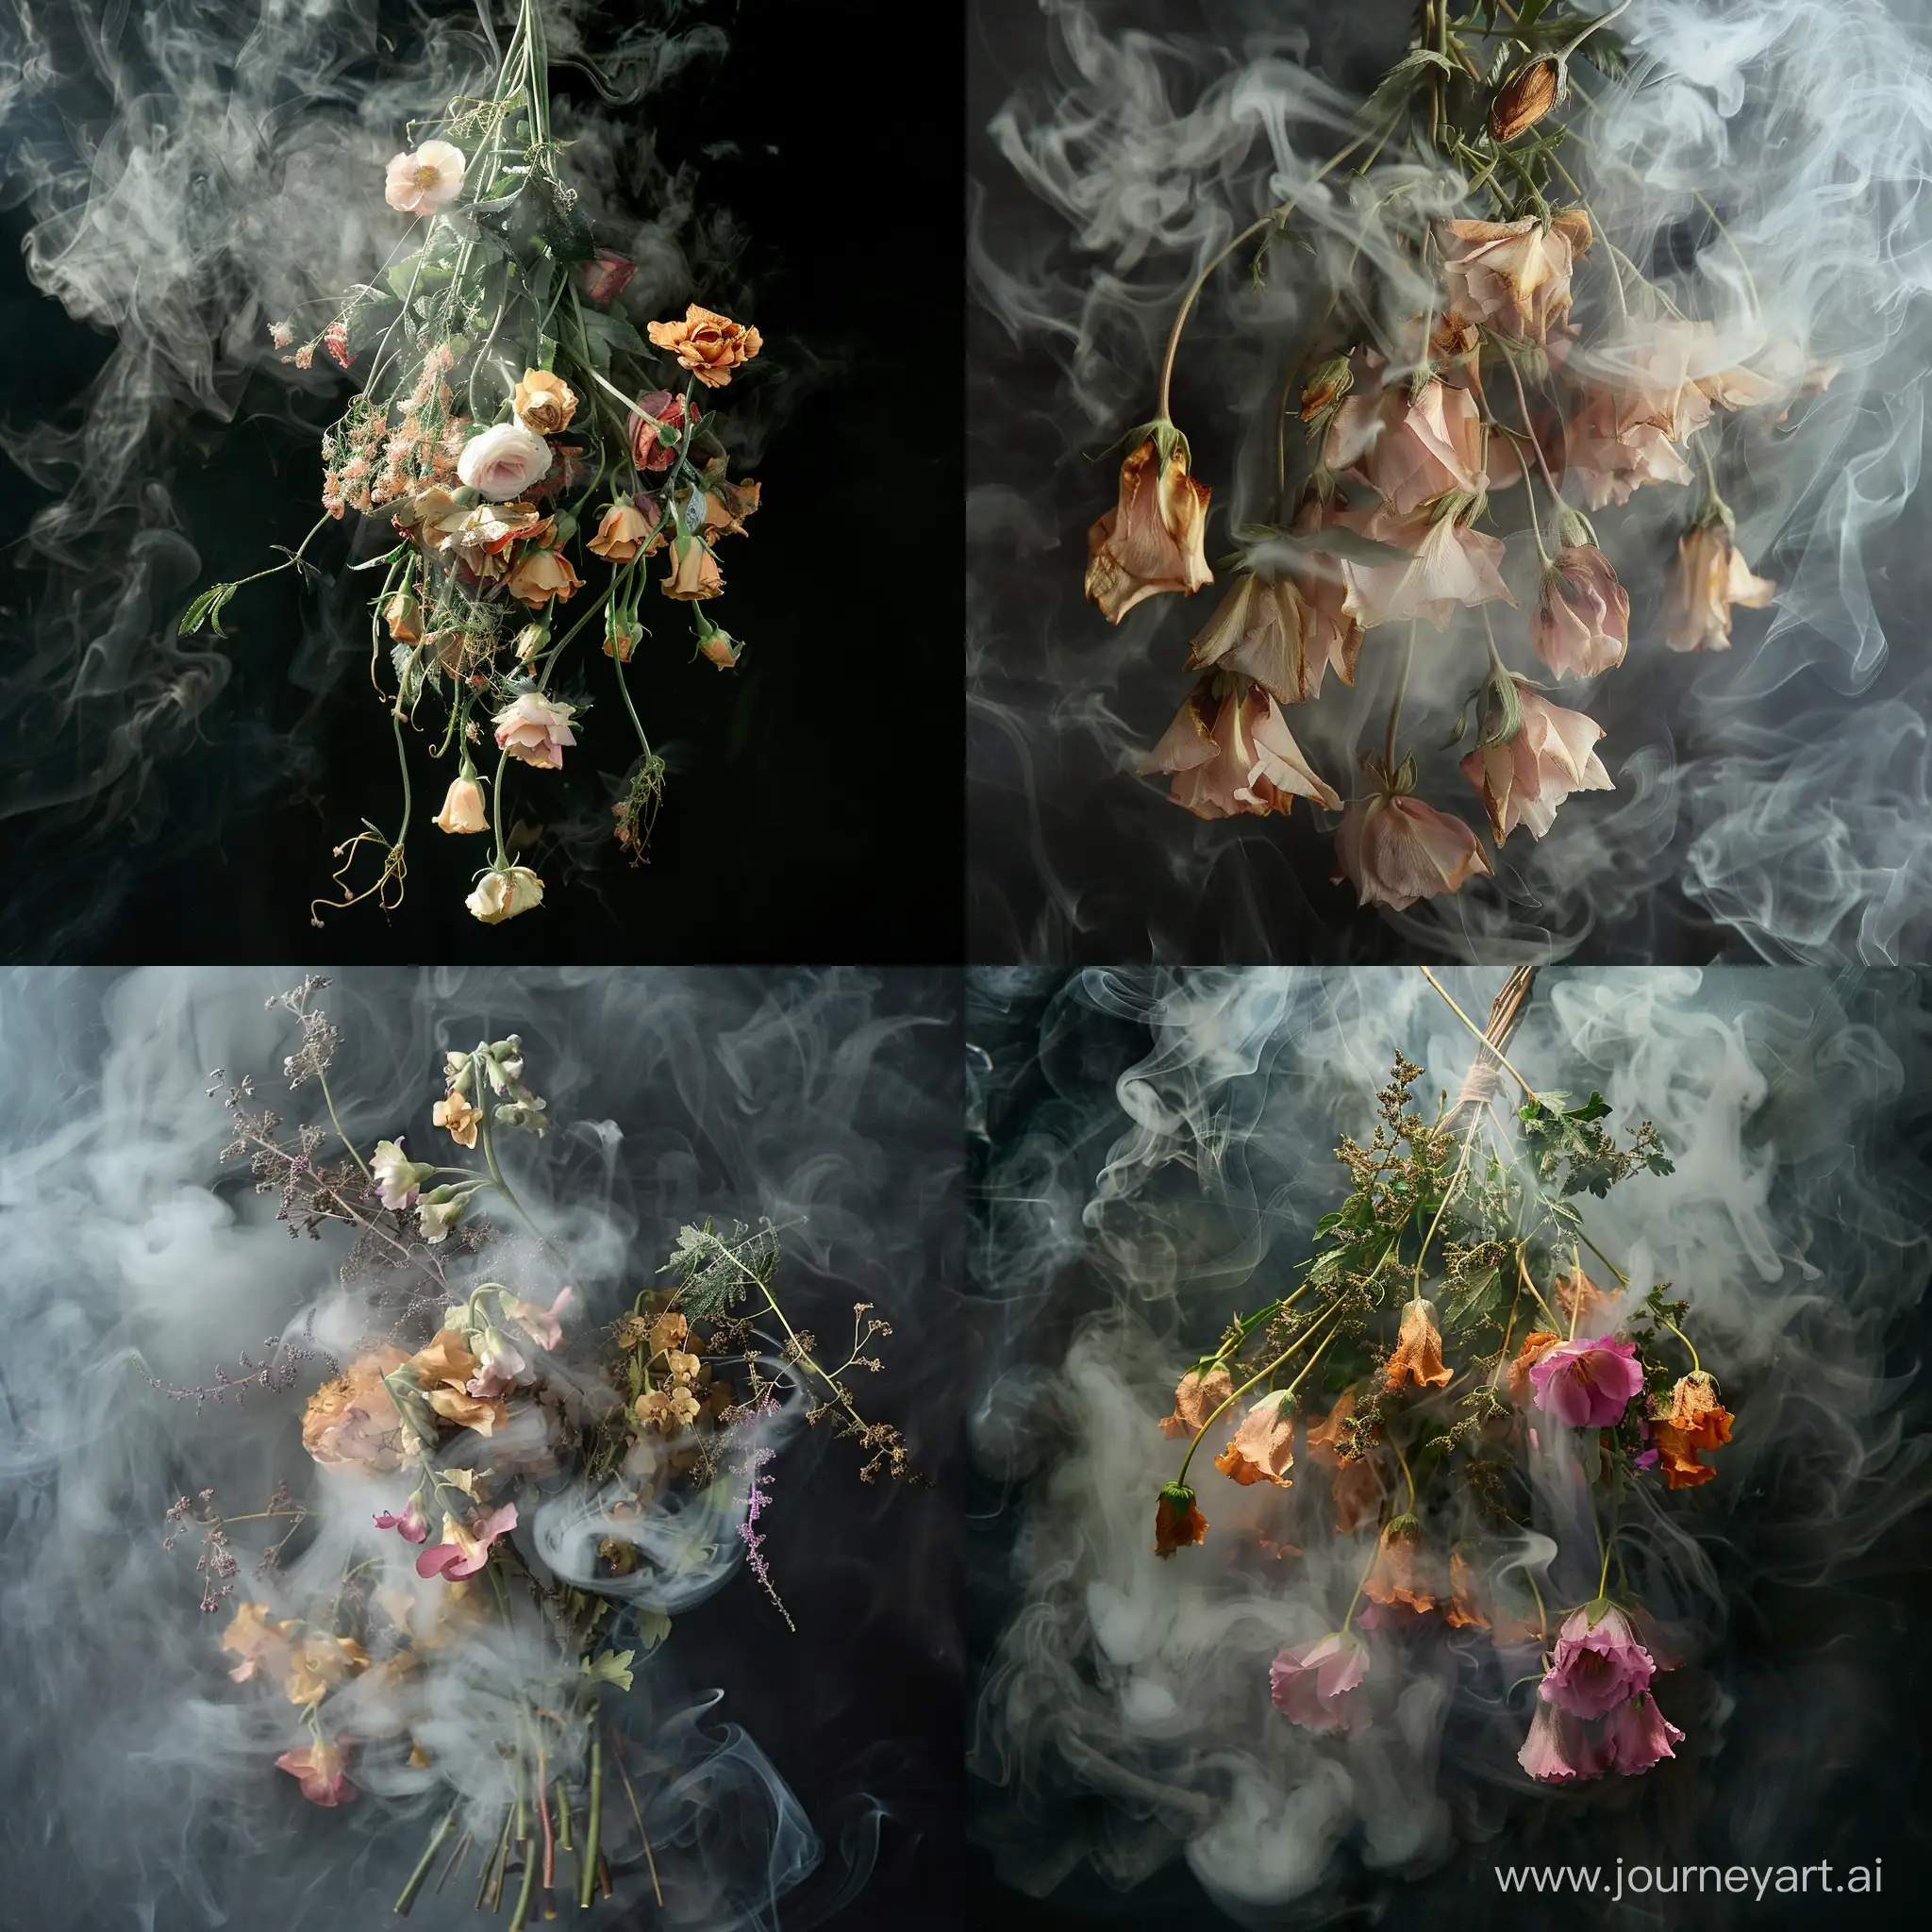 Elegant-Bouquet-with-Drooping-Flowers-Enveloped-in-Mystical-Smoke